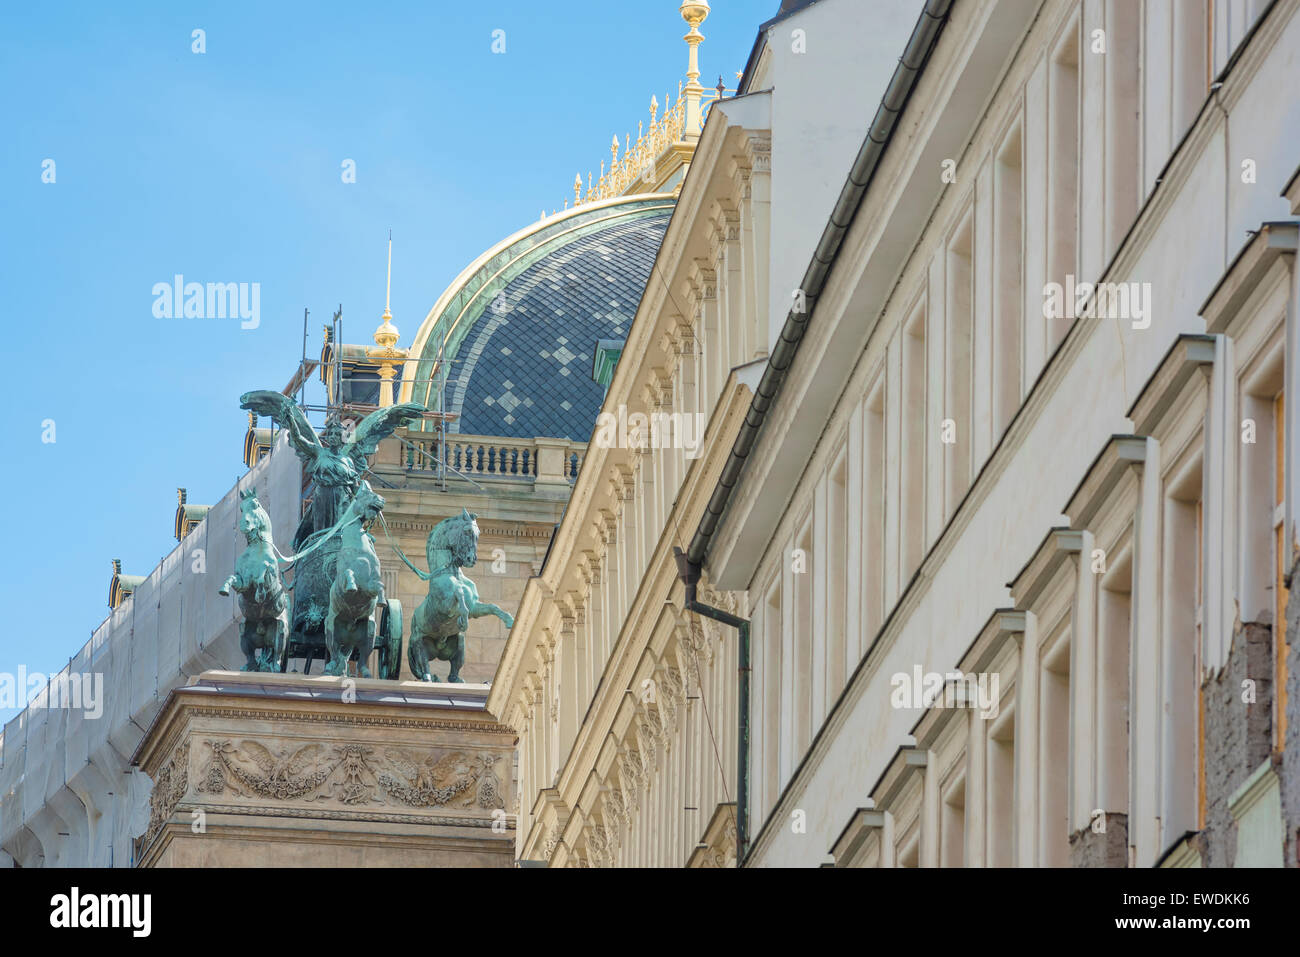 Prague architecture, view of the statue of Victory and her triga chariot on top of the  Czech National Theatre building in Prague, Czech Republic. Stock Photo